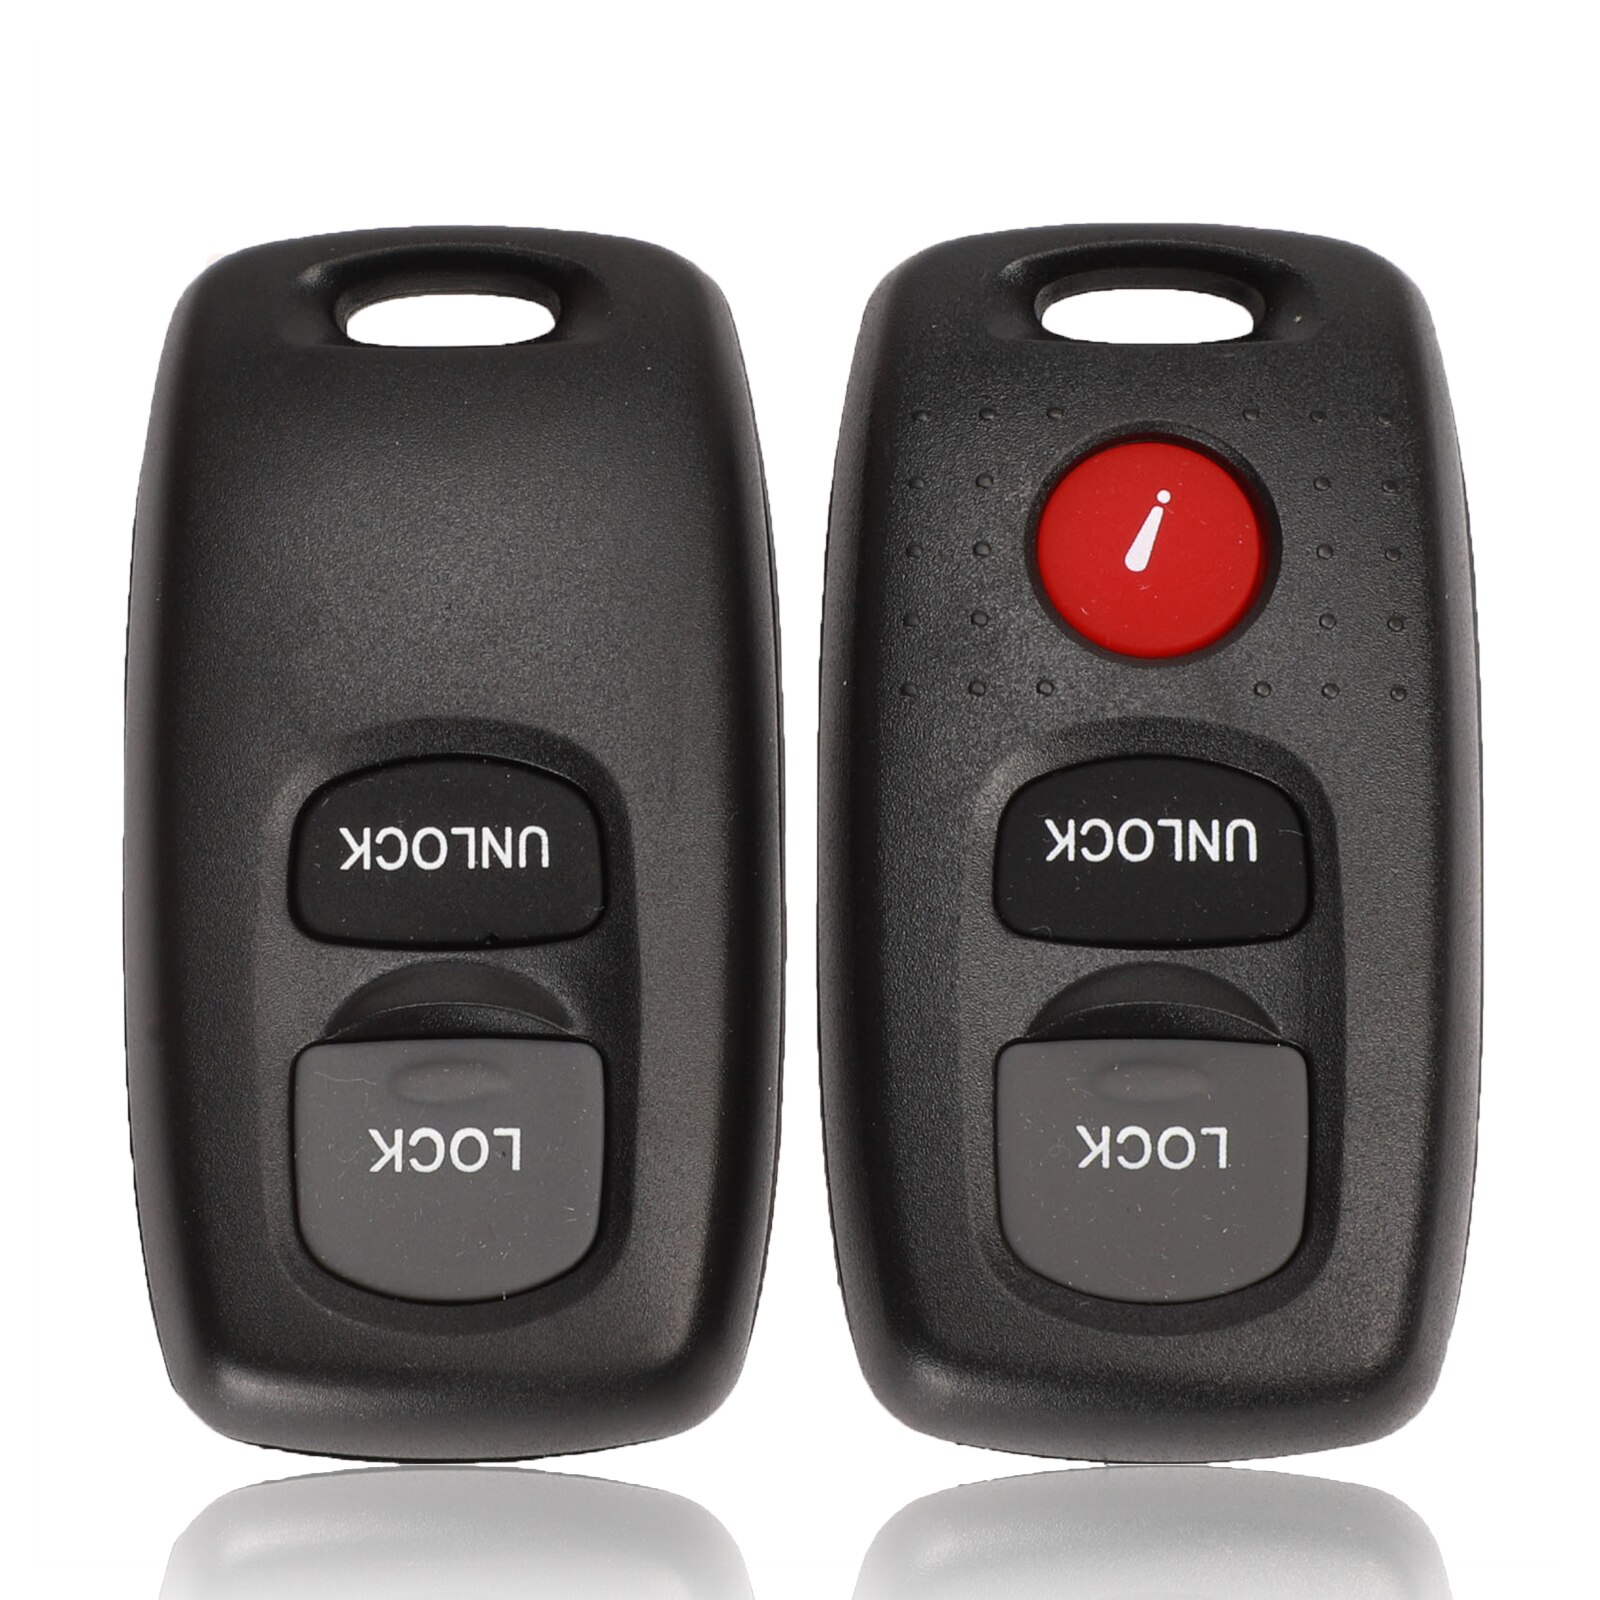 Bilchave Vervanging 2/3 Knoppen Keyless Entry Remote Key Shell Fob Voor Mazda 2 3 6 Serie 2004 2005 2006 2007